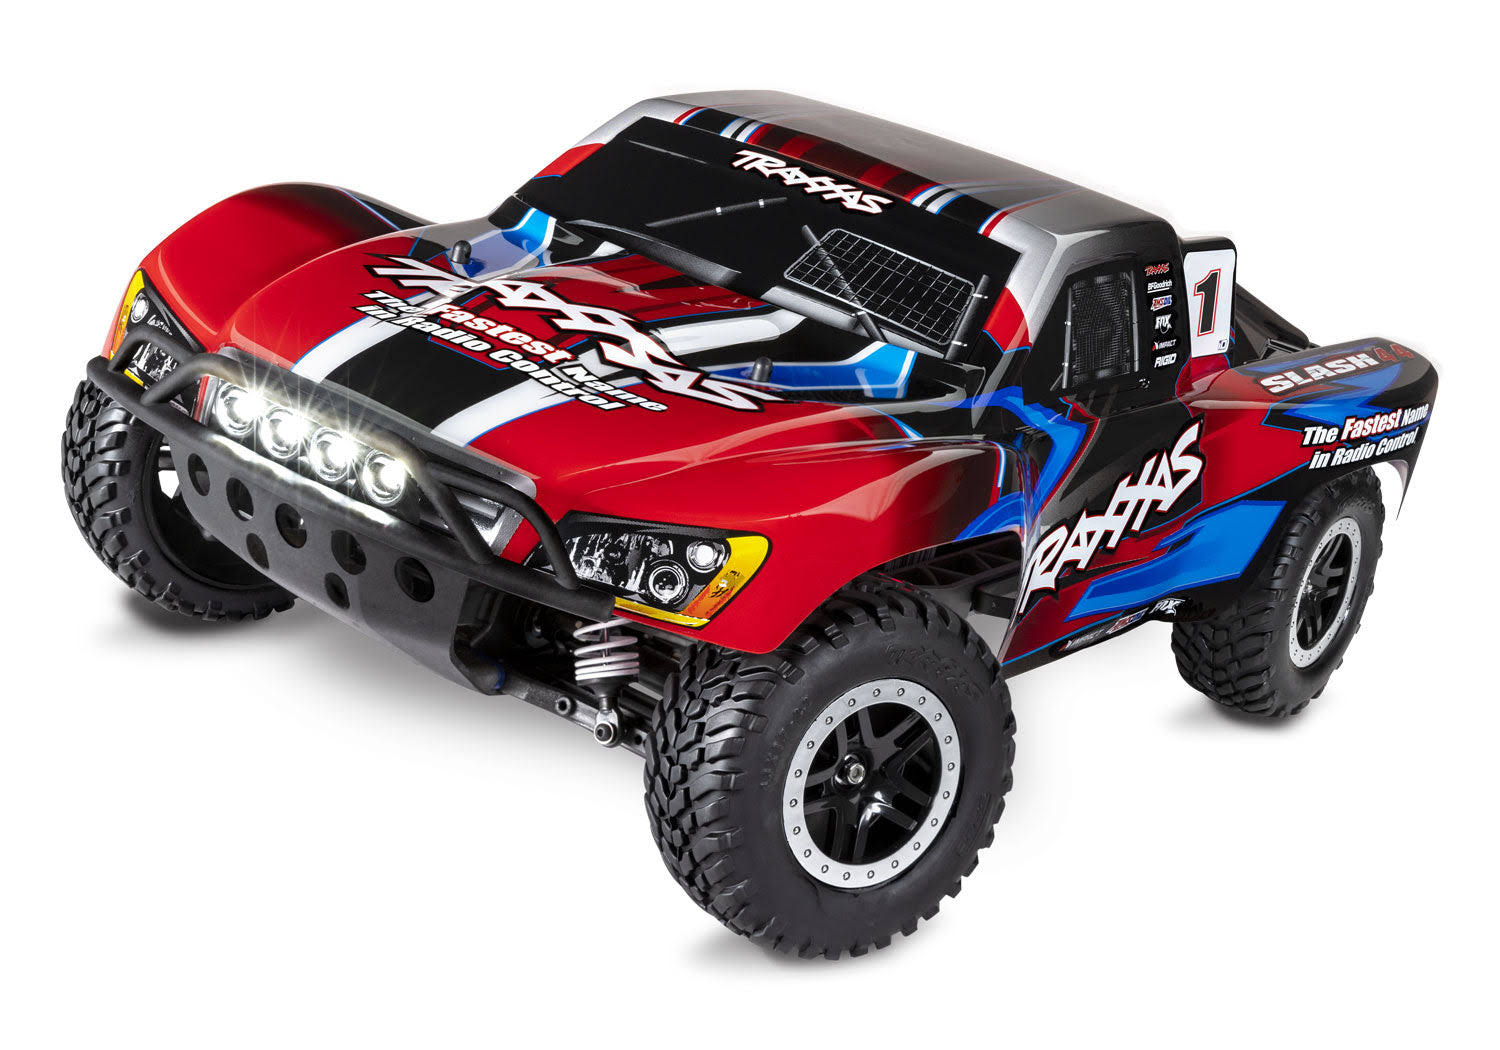 TRAXXAS TRA 68054-61-RED Slash 4X4: 1/10 Scale 4WD Electric Short Course Truck. Ready-to-Race with TQ 2.4GHz Radio System, XL-5 ESC (fwd/rev), and LED